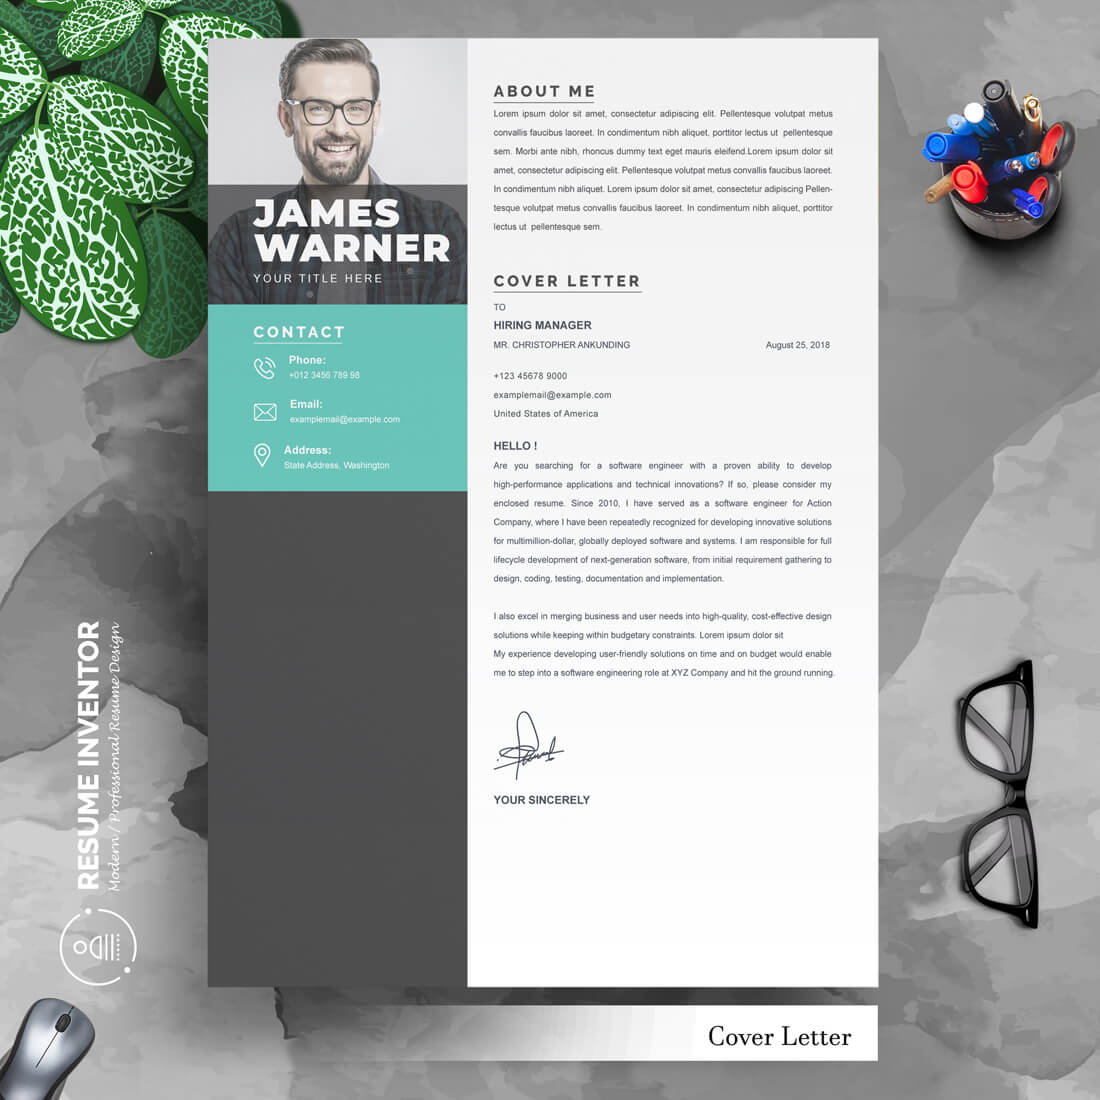 03 3 pages professional ms word aple pages eps photoshop psd resume cv design template design by resume inventor 263